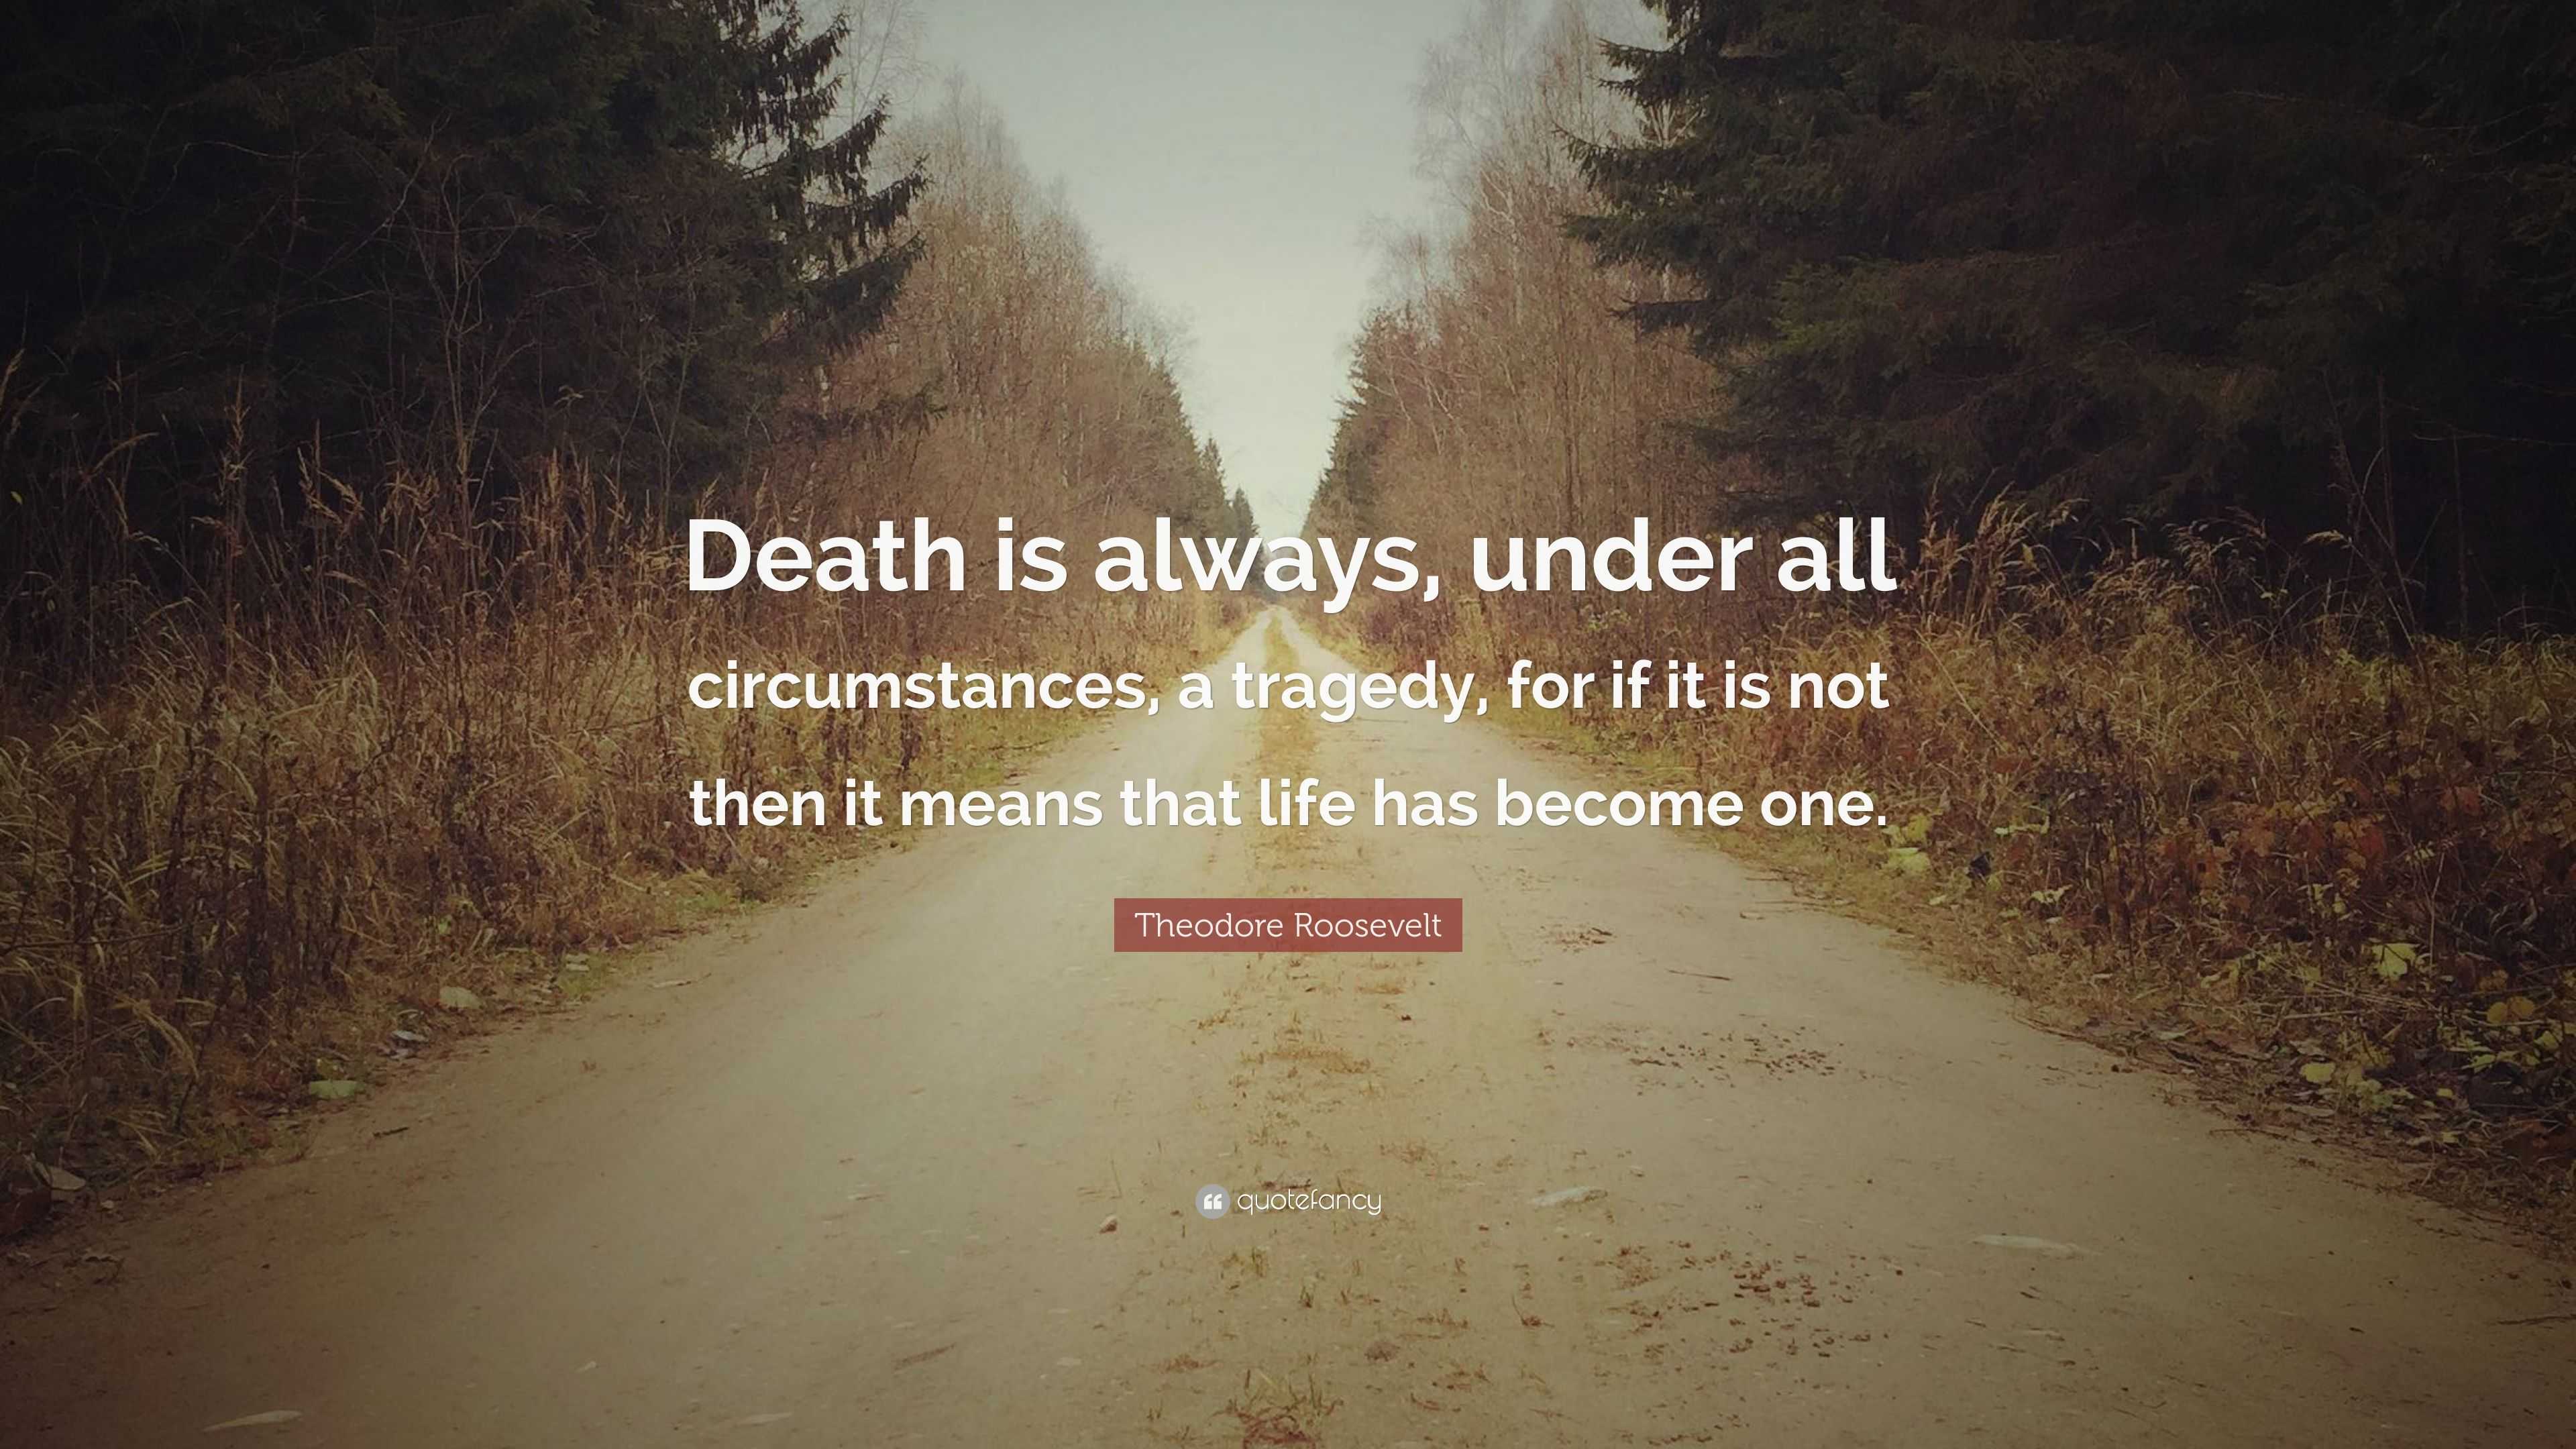 Theodore Roosevelt Quote: “Death is always, under all circumstances, a